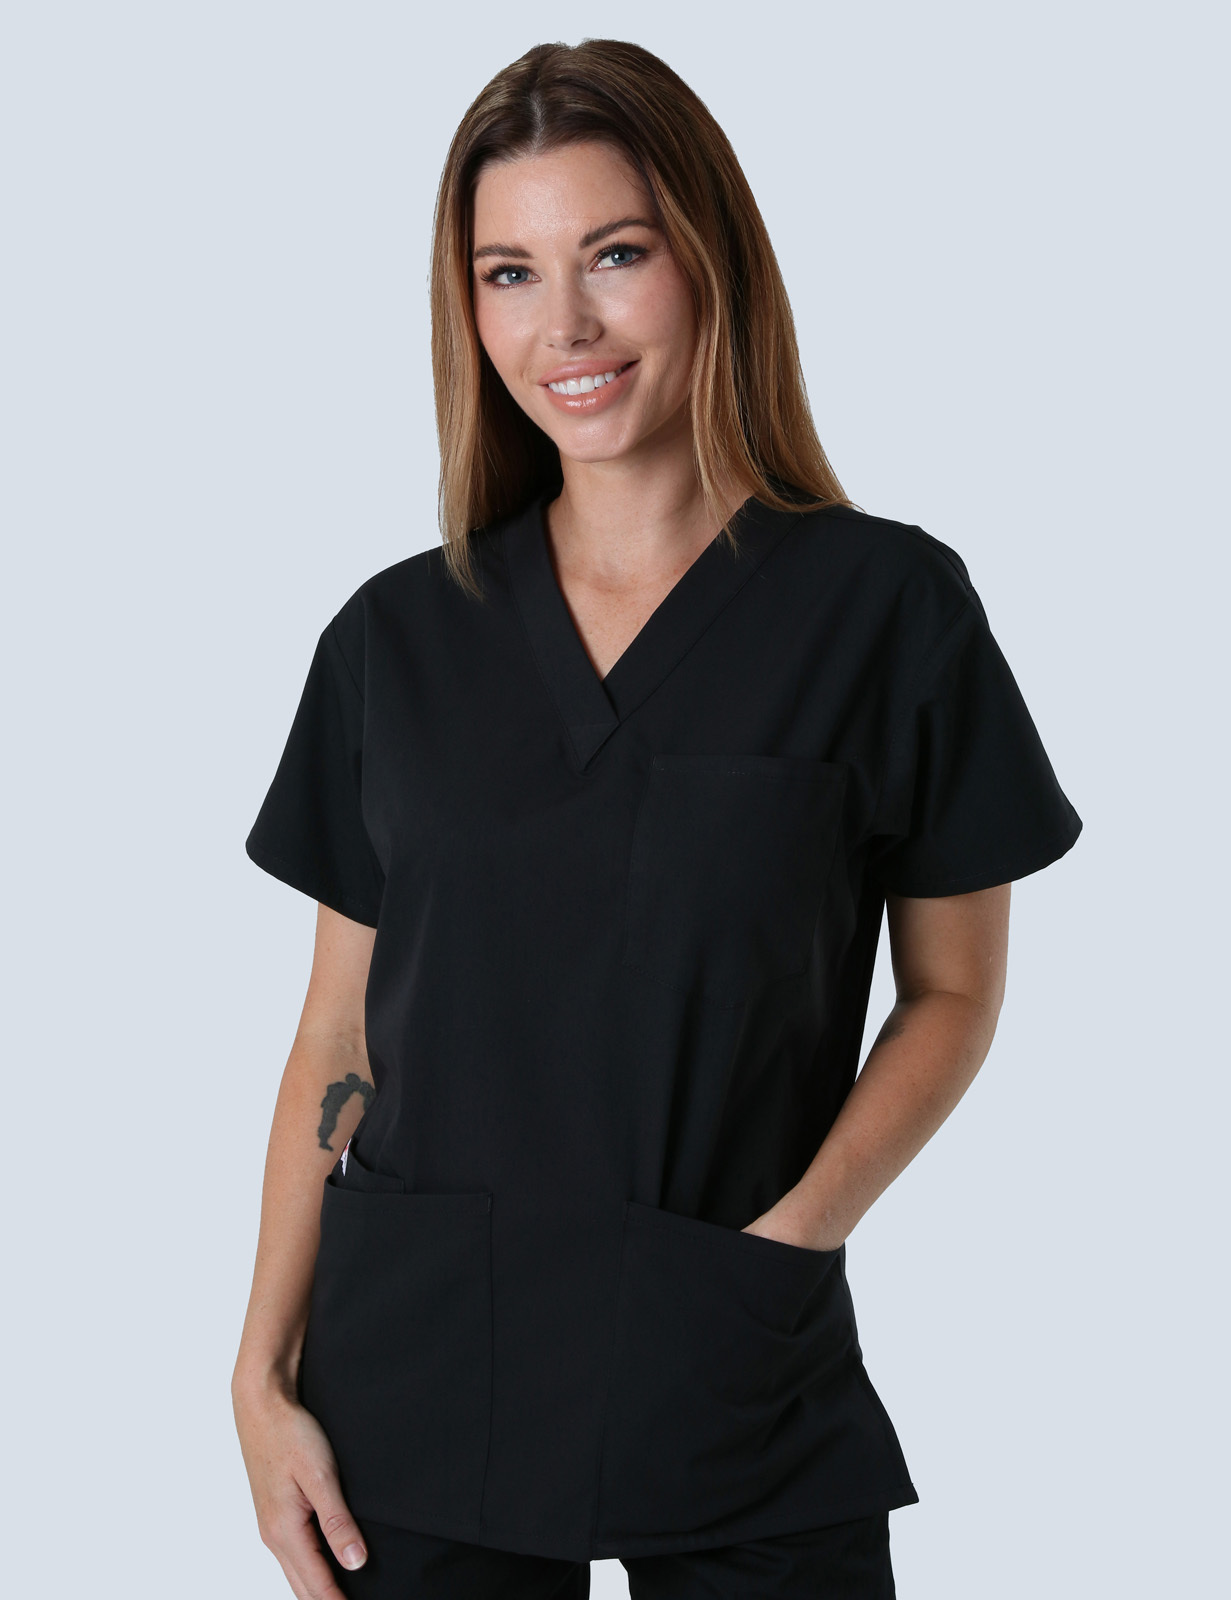 Holmesglen Private Hospital - ICC RN (4 Pocket Scrub Top and Cargo Pants in Black in Black incl Logos)